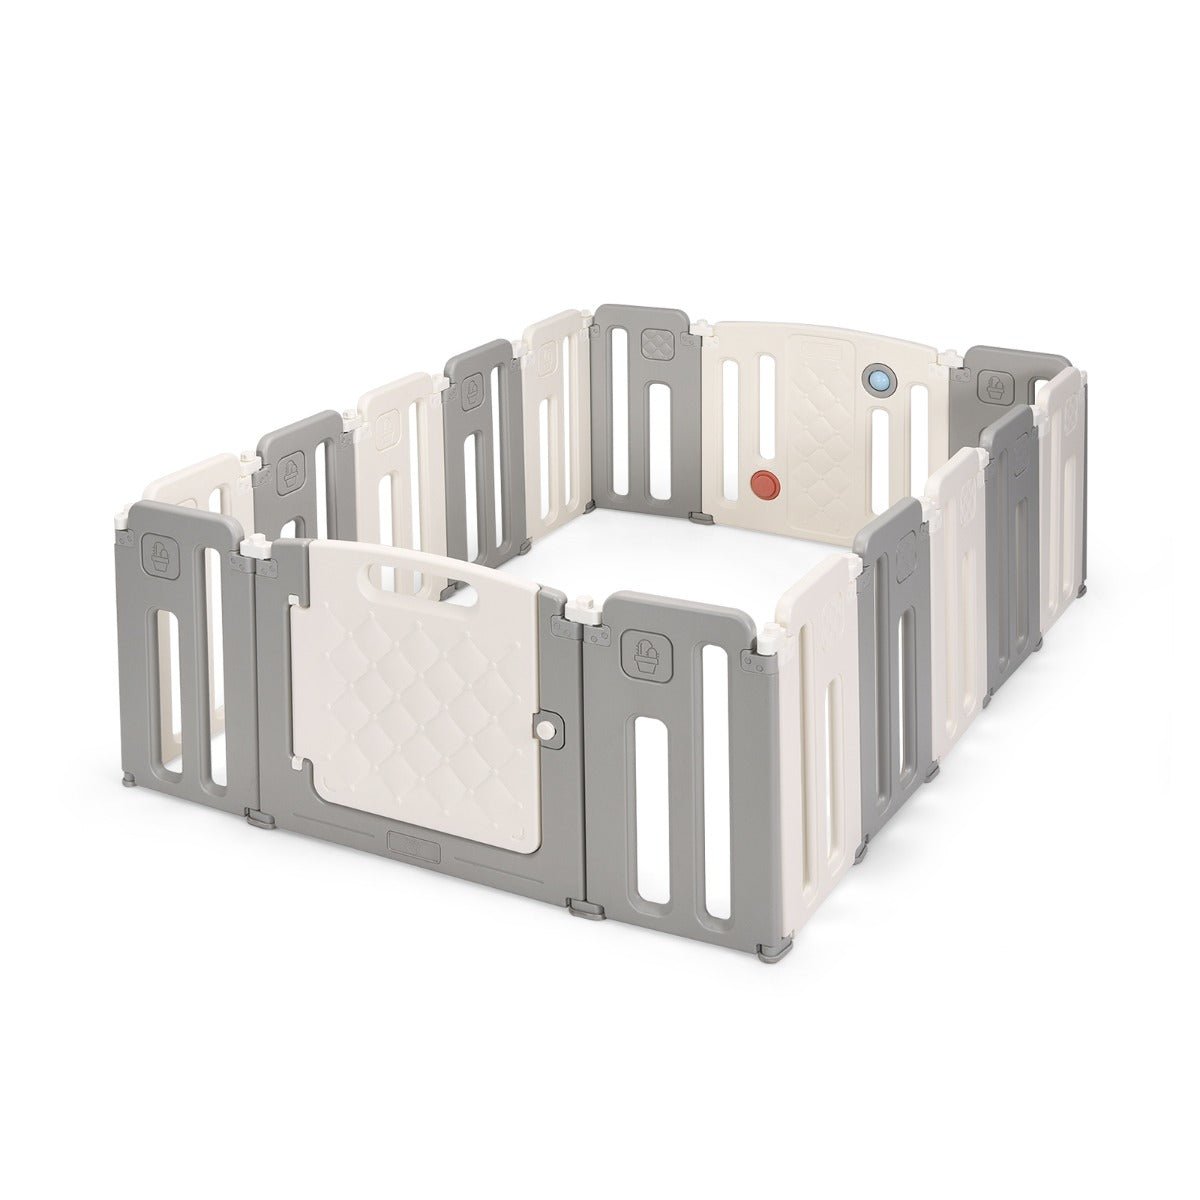 Toddler Play Area with Foldable Design and Safety Lock